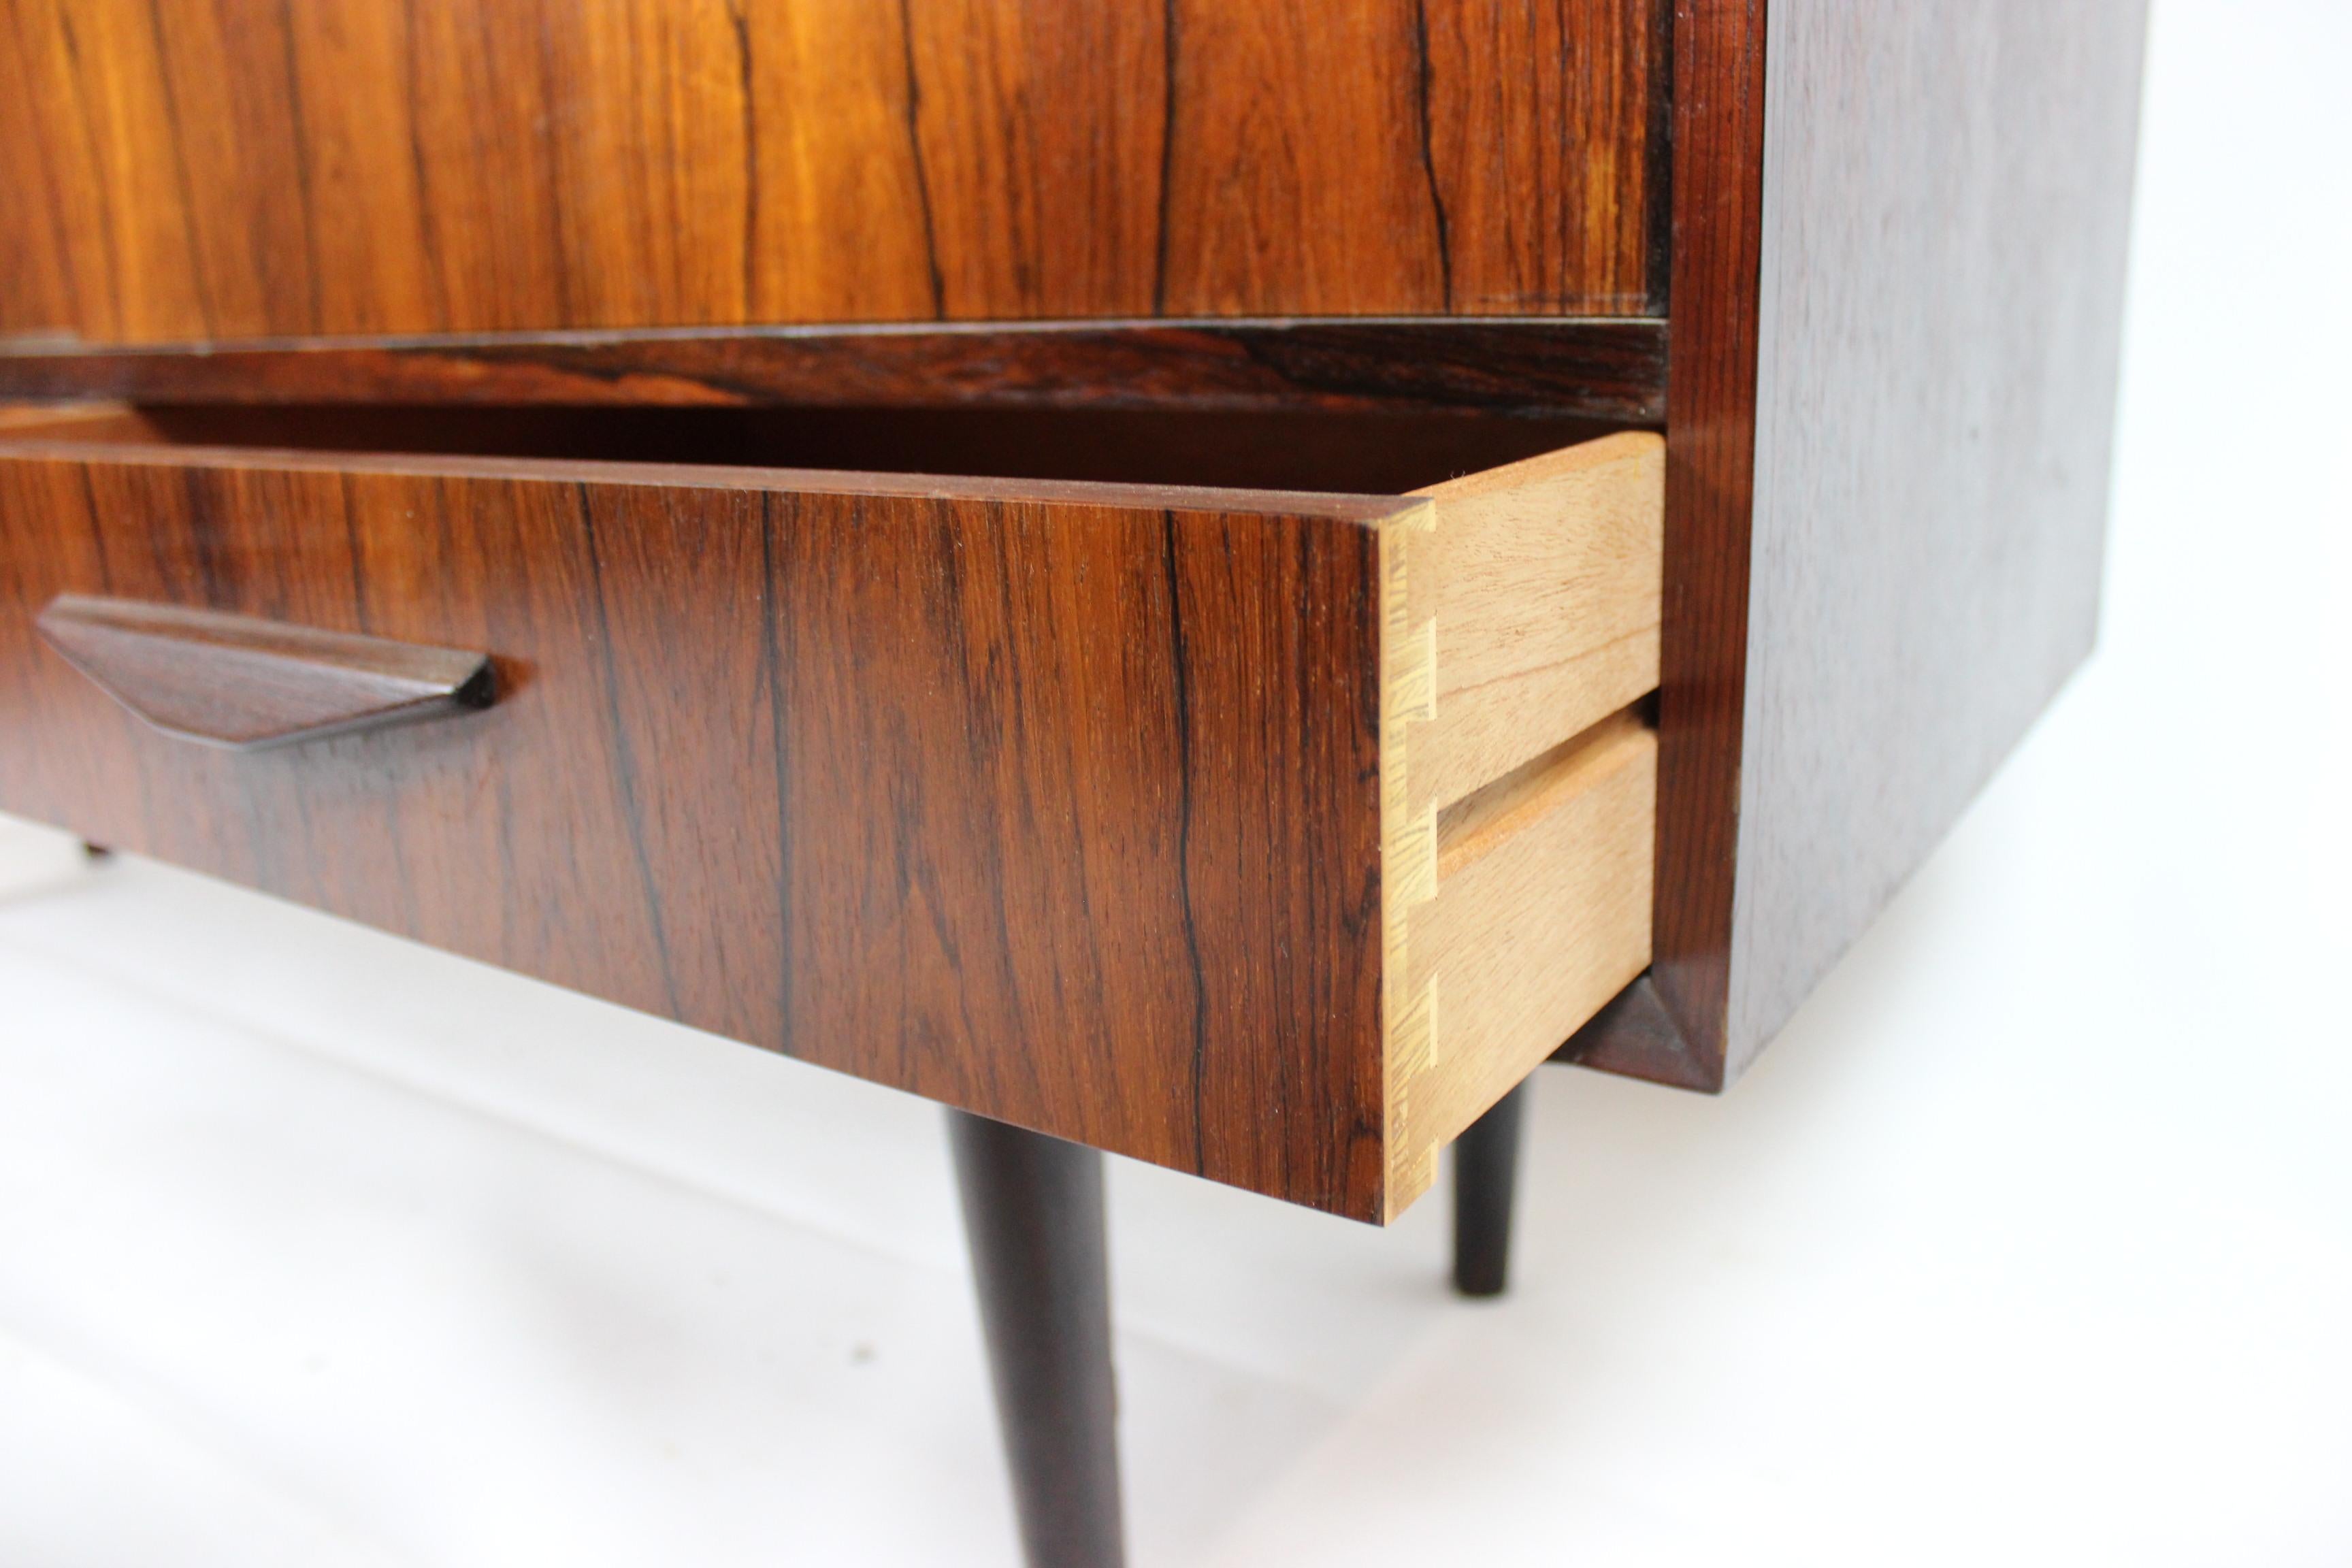 Mid-20th Century Sideboard in Rosewood of Danish Design from the 1960s